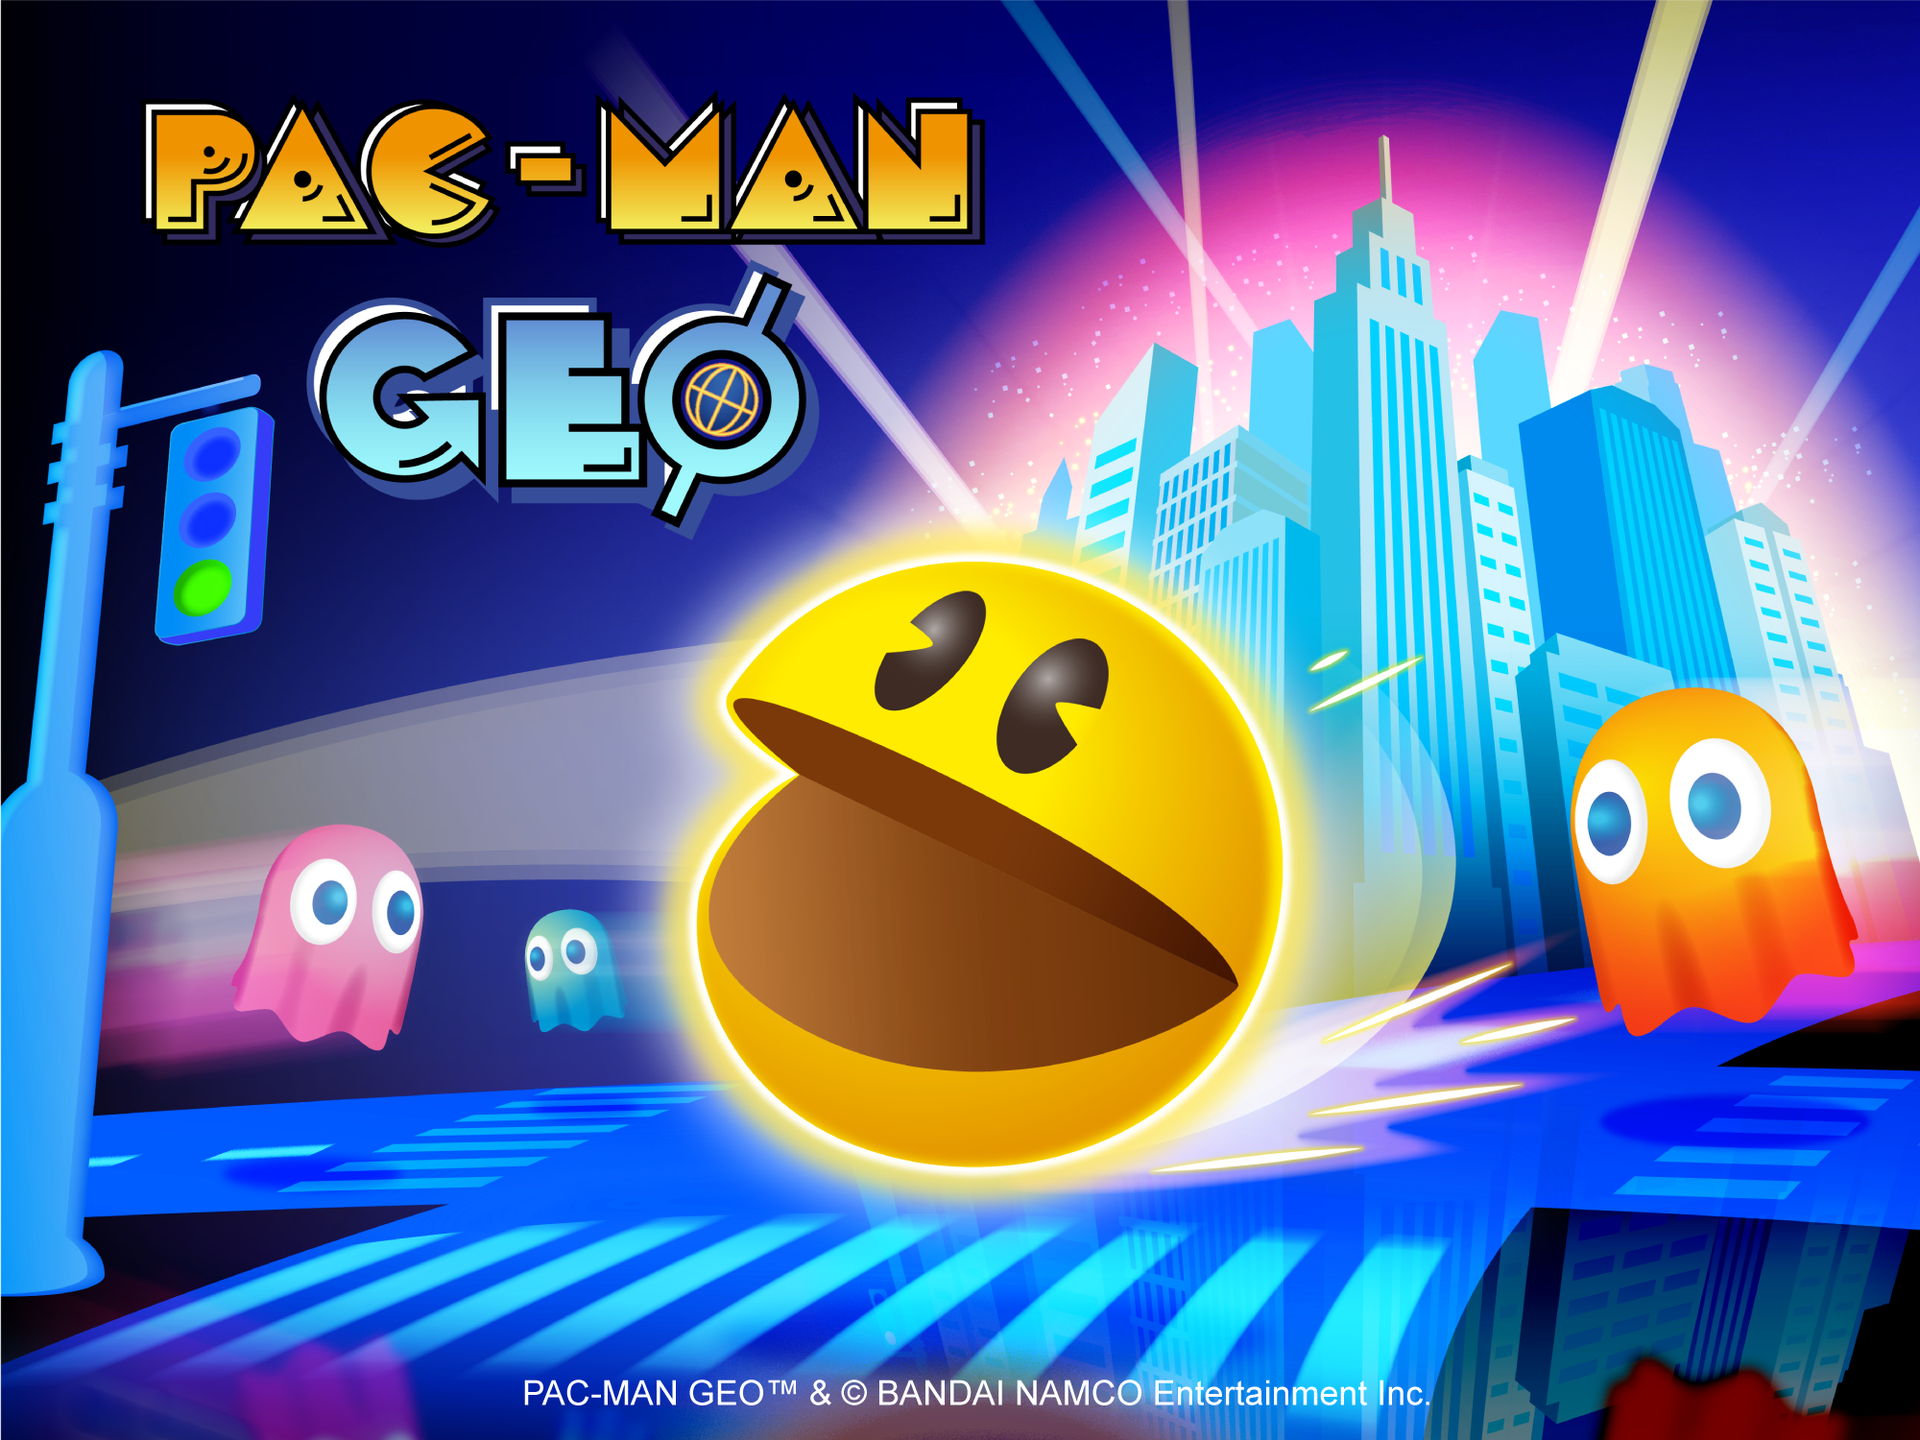 PAC-MAN GEO the perfect union between an arcade classic and Google Maps